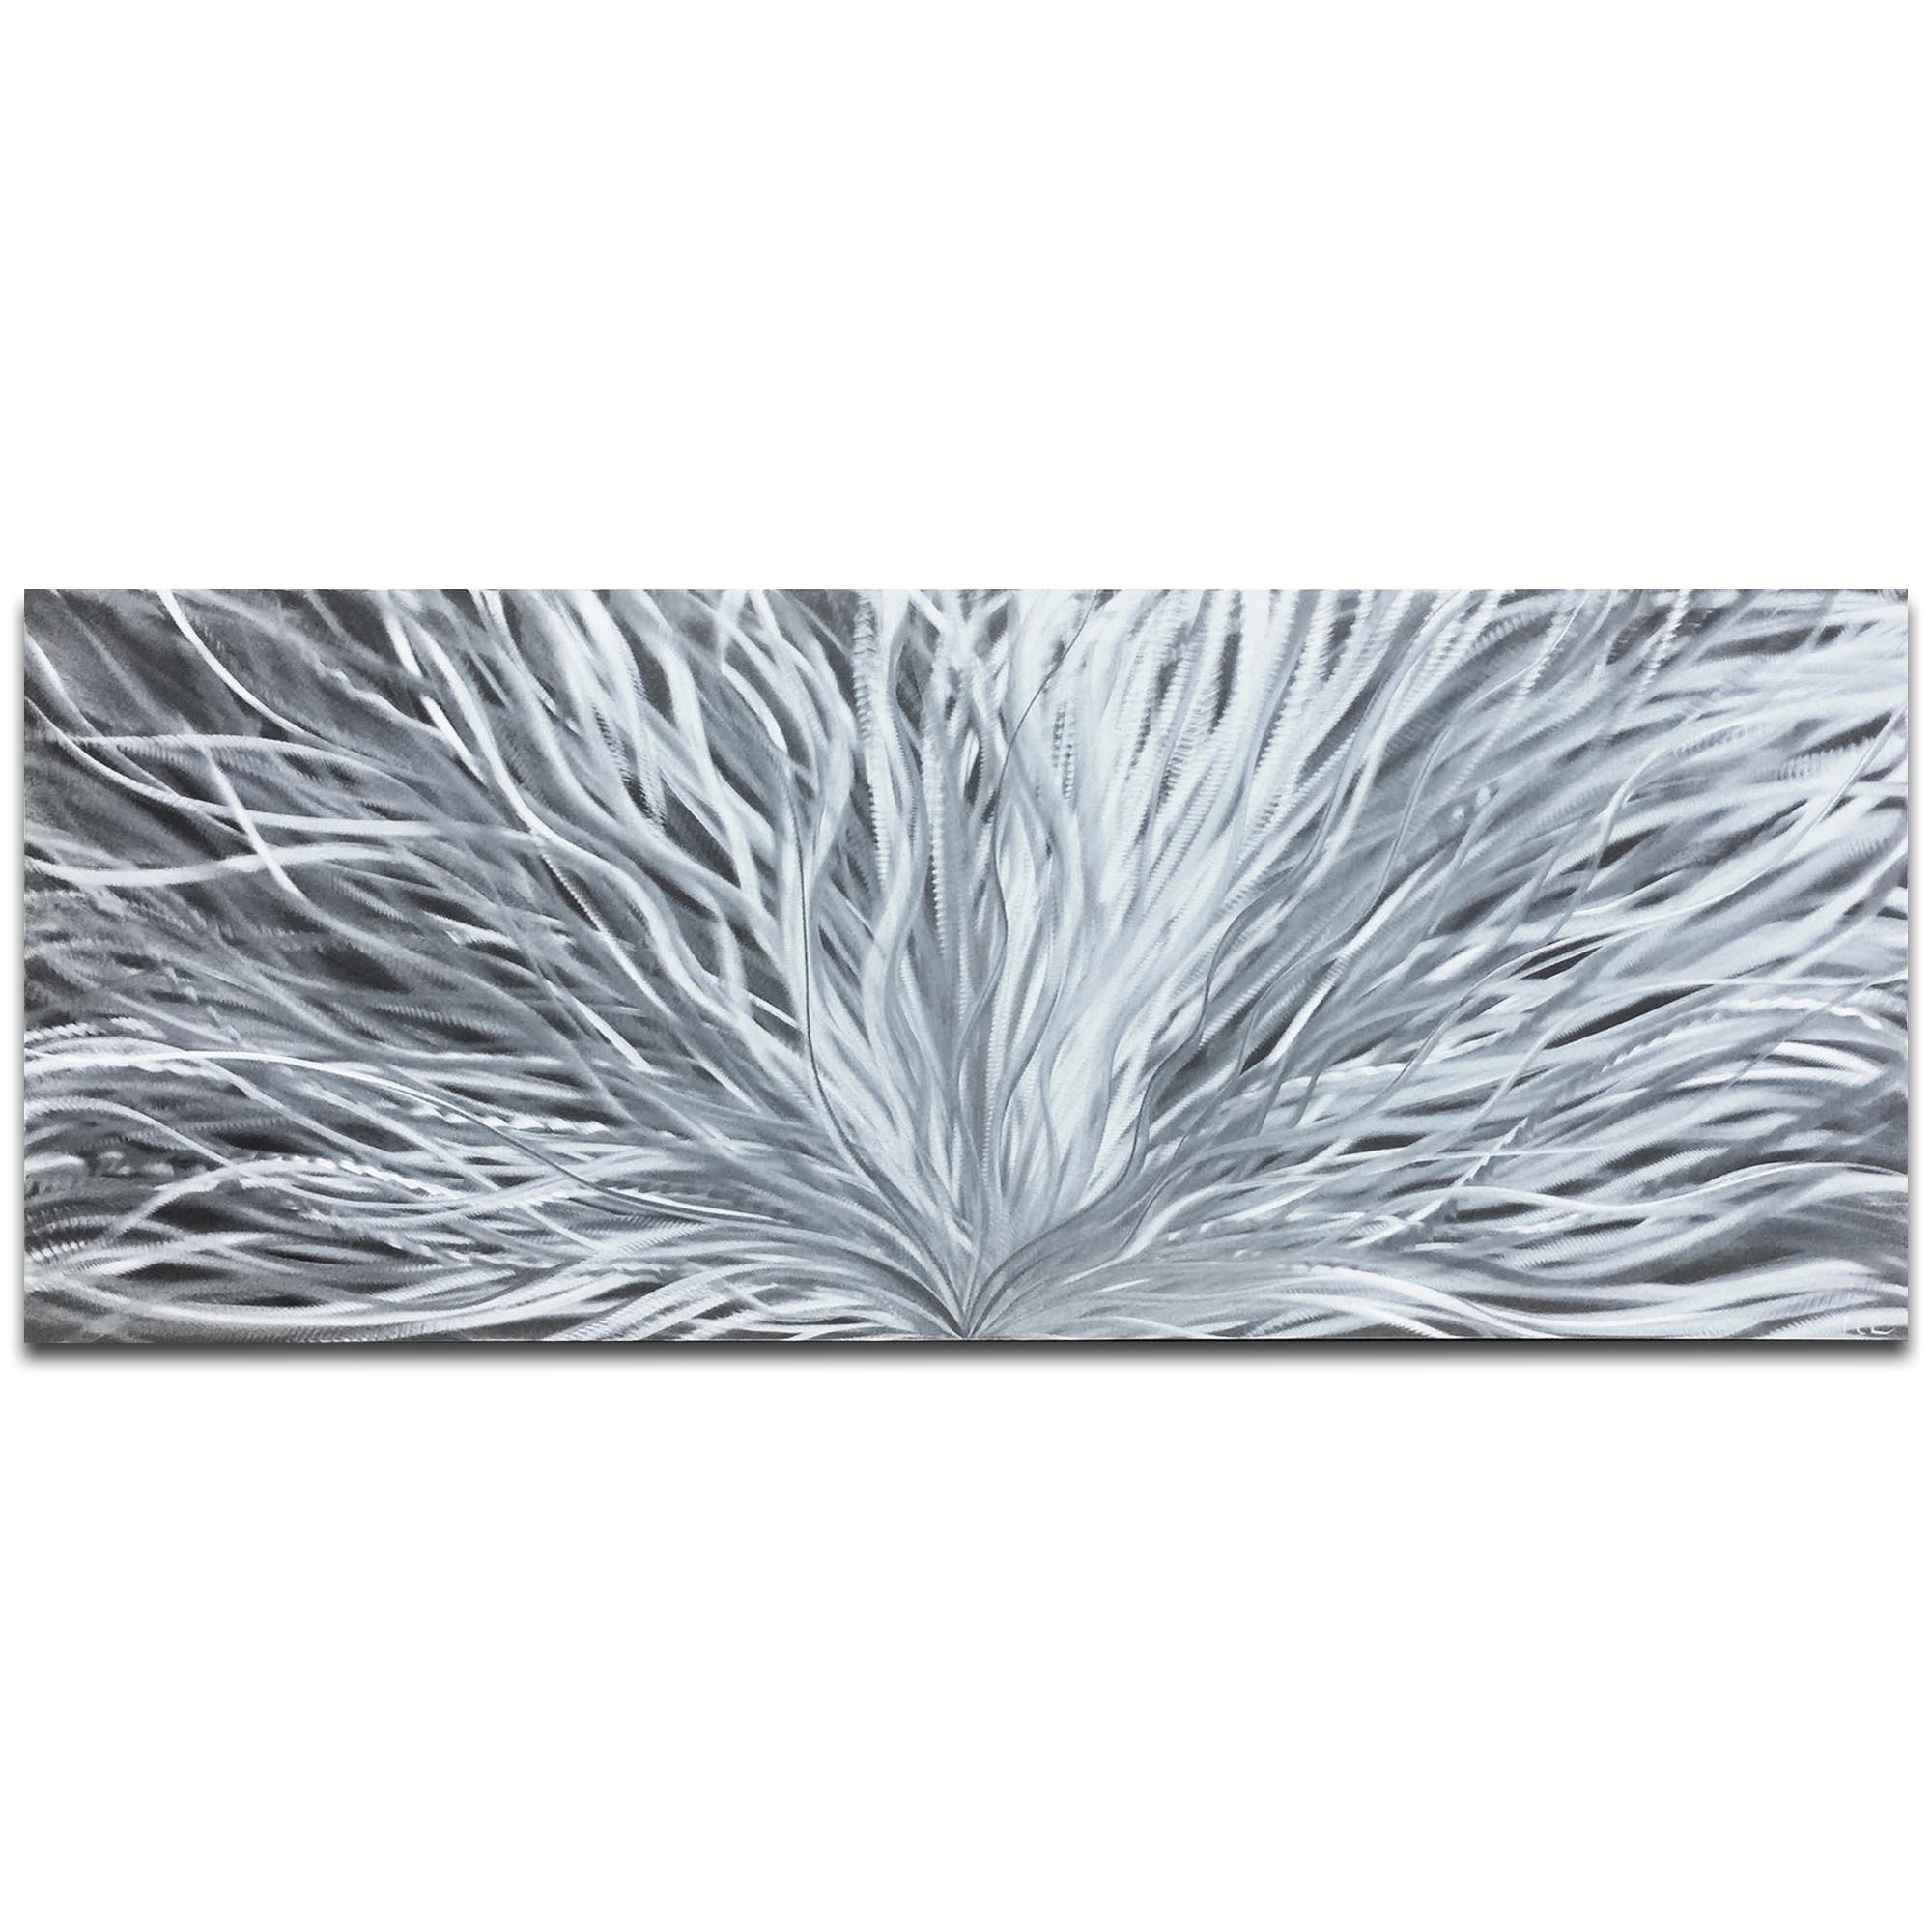 Helena Martin 'Blooming Silver' 60in x 24in Original Abstract Art on Ground Metal